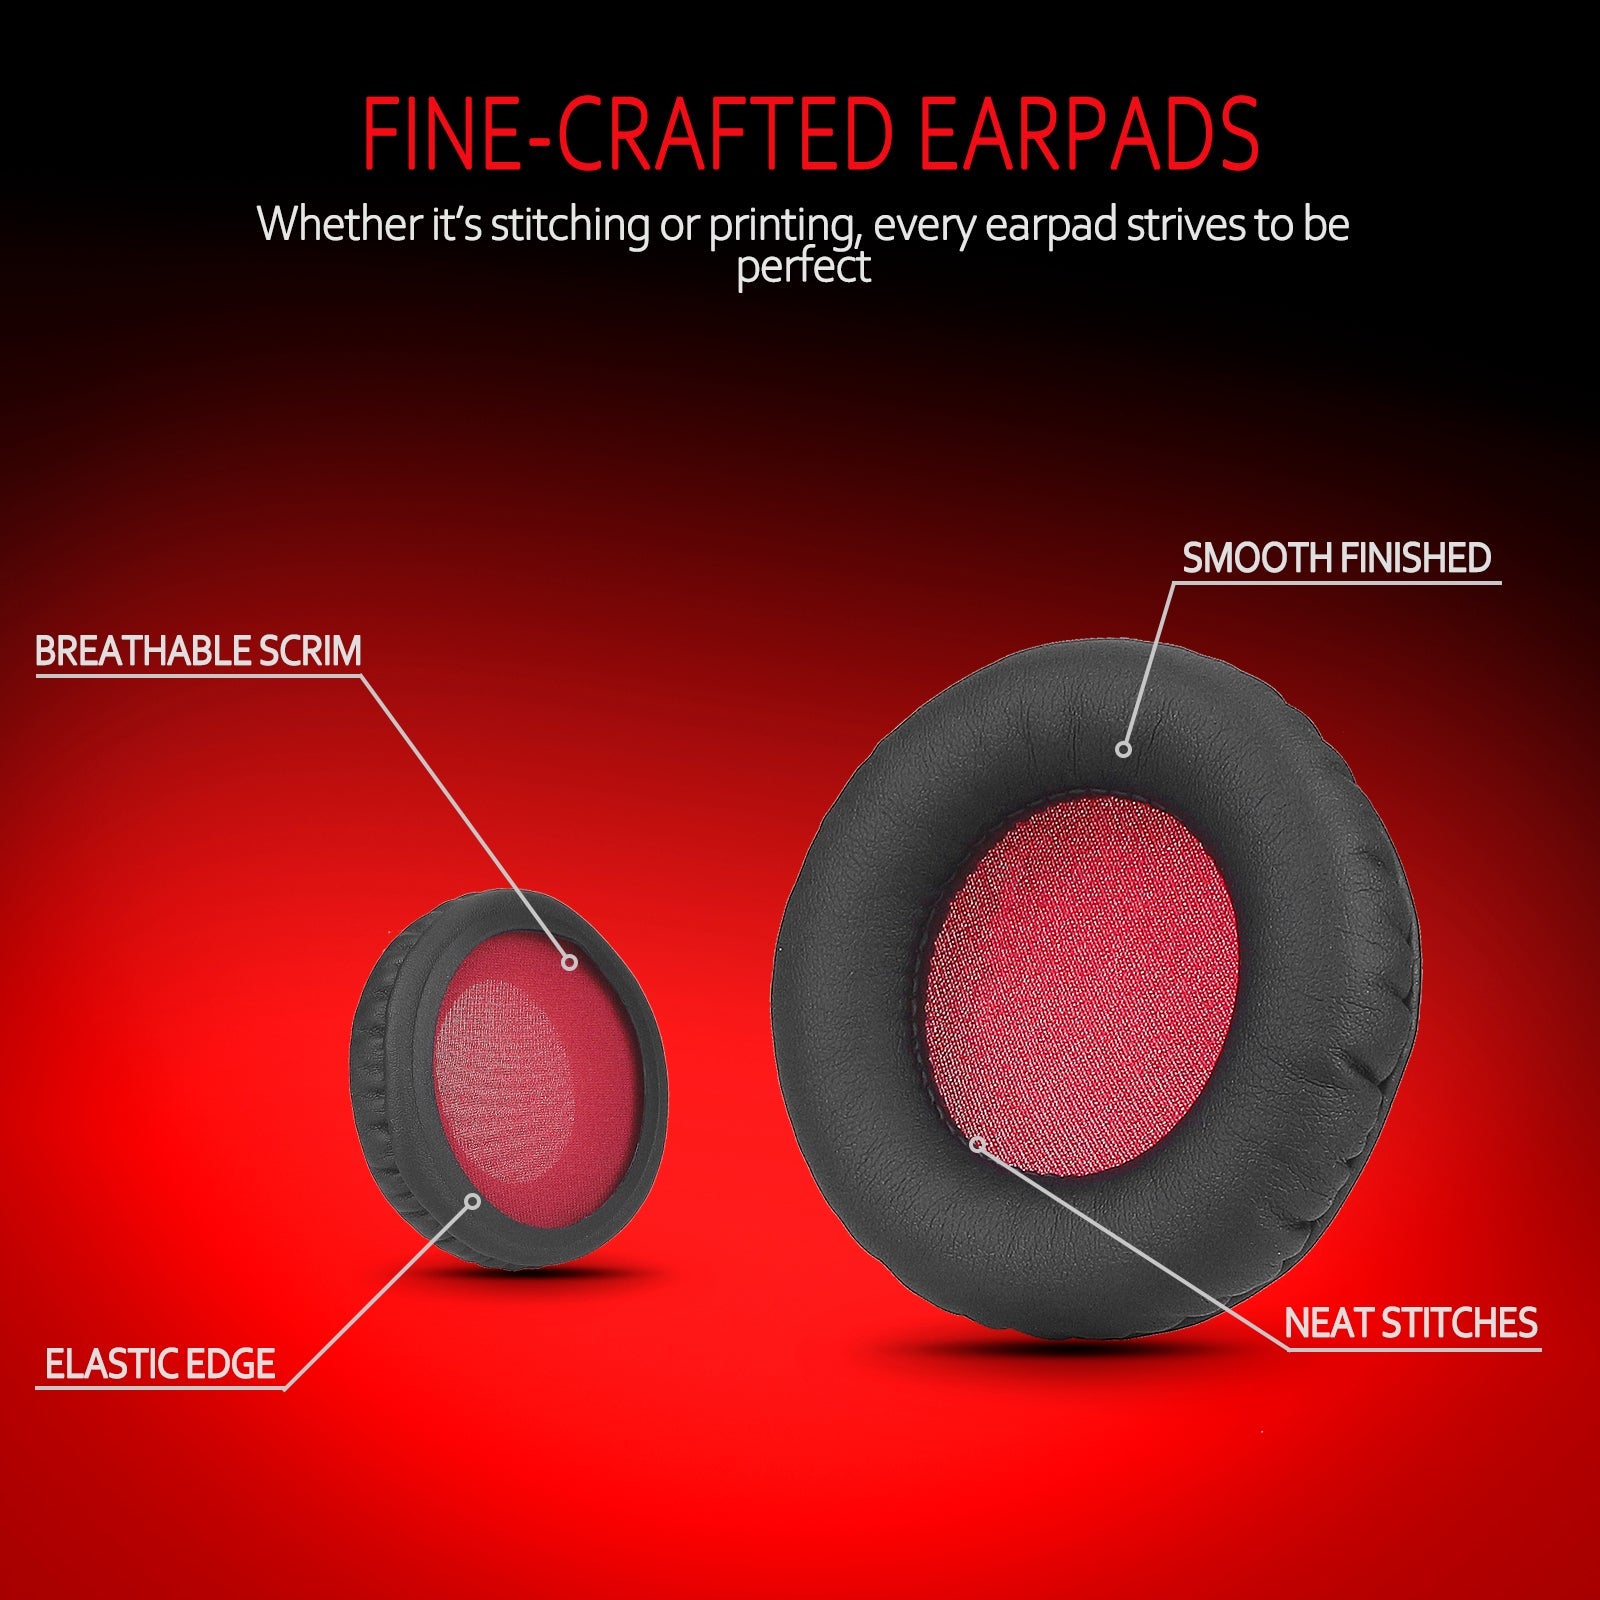 Universal Replacement Ear Pads for Sony MDR-NC6/Audio Technica S200BT/, Many Other 75MM Round On-Ear Headphones(List Inside), By Krone Kalpasmos Black